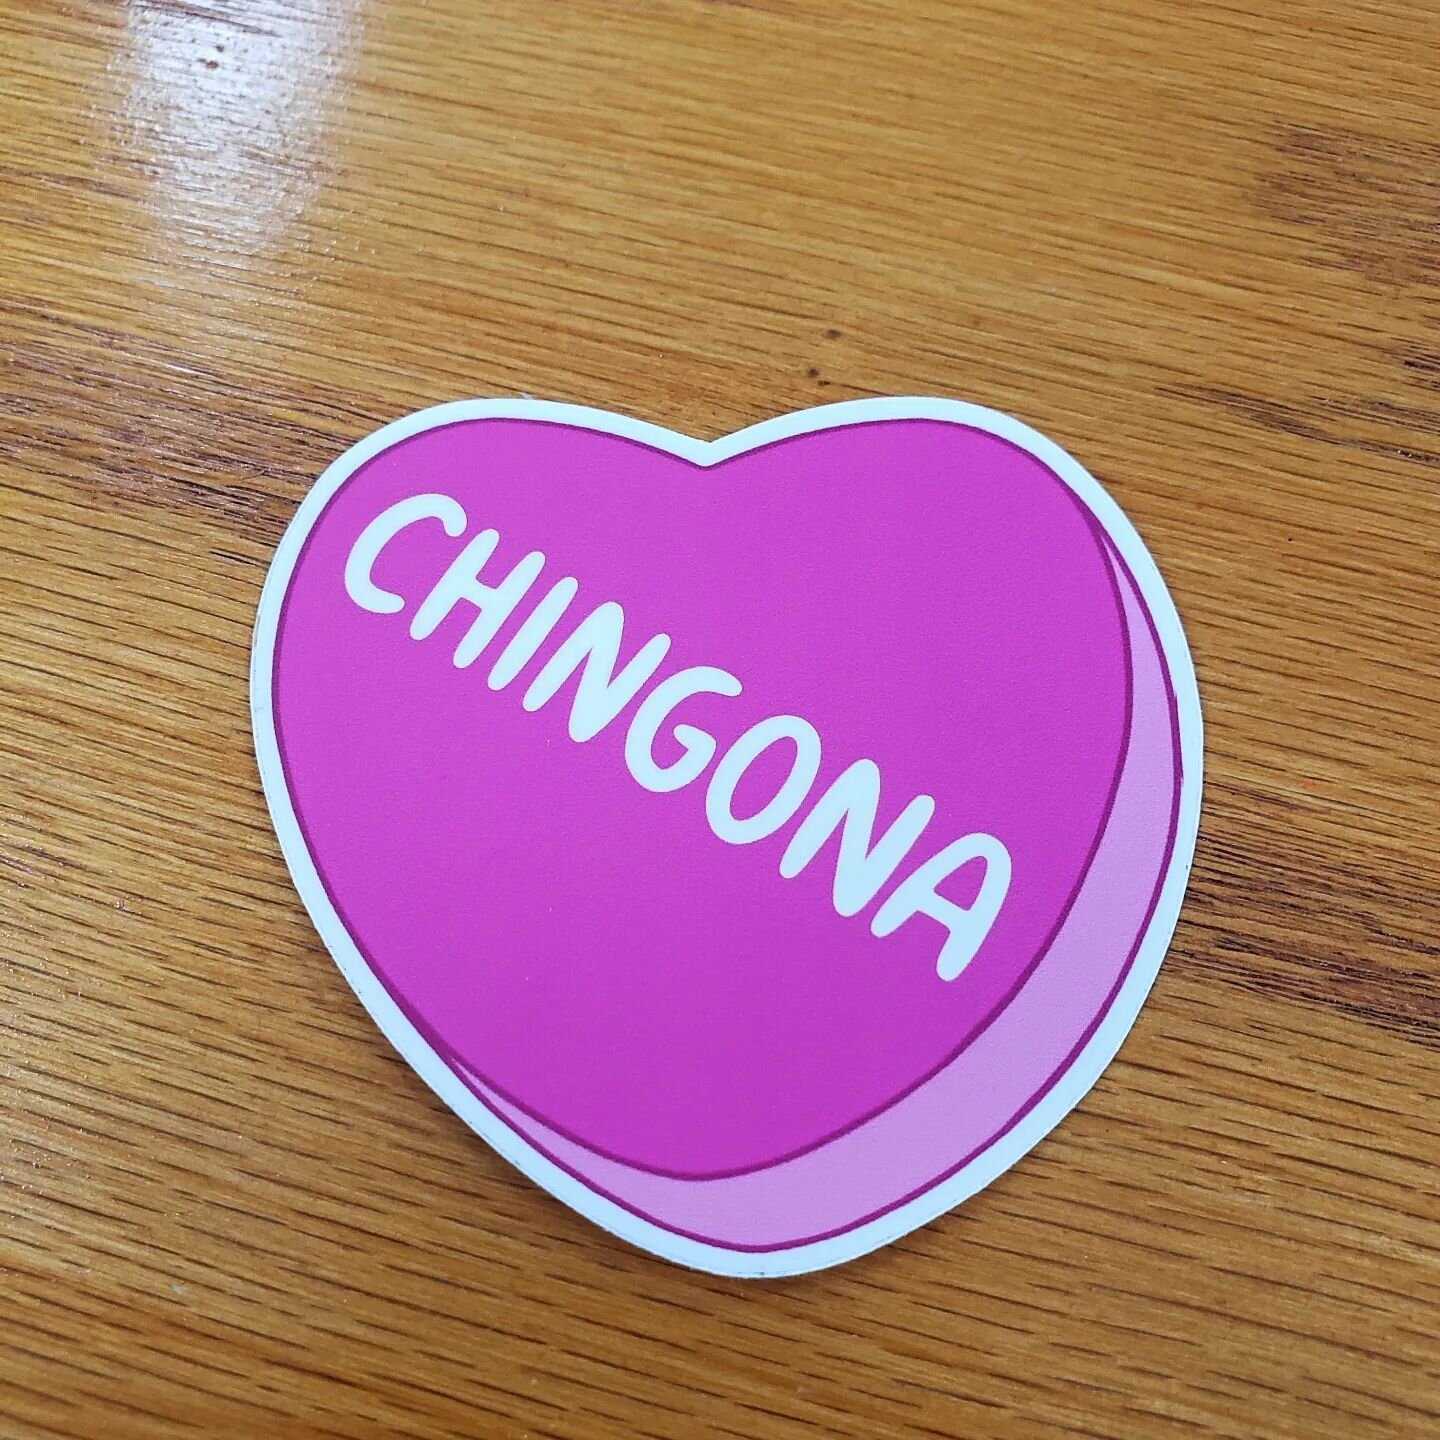 Don't ever forget 

#stickers #chingona #bestpinatasintown #sanjose